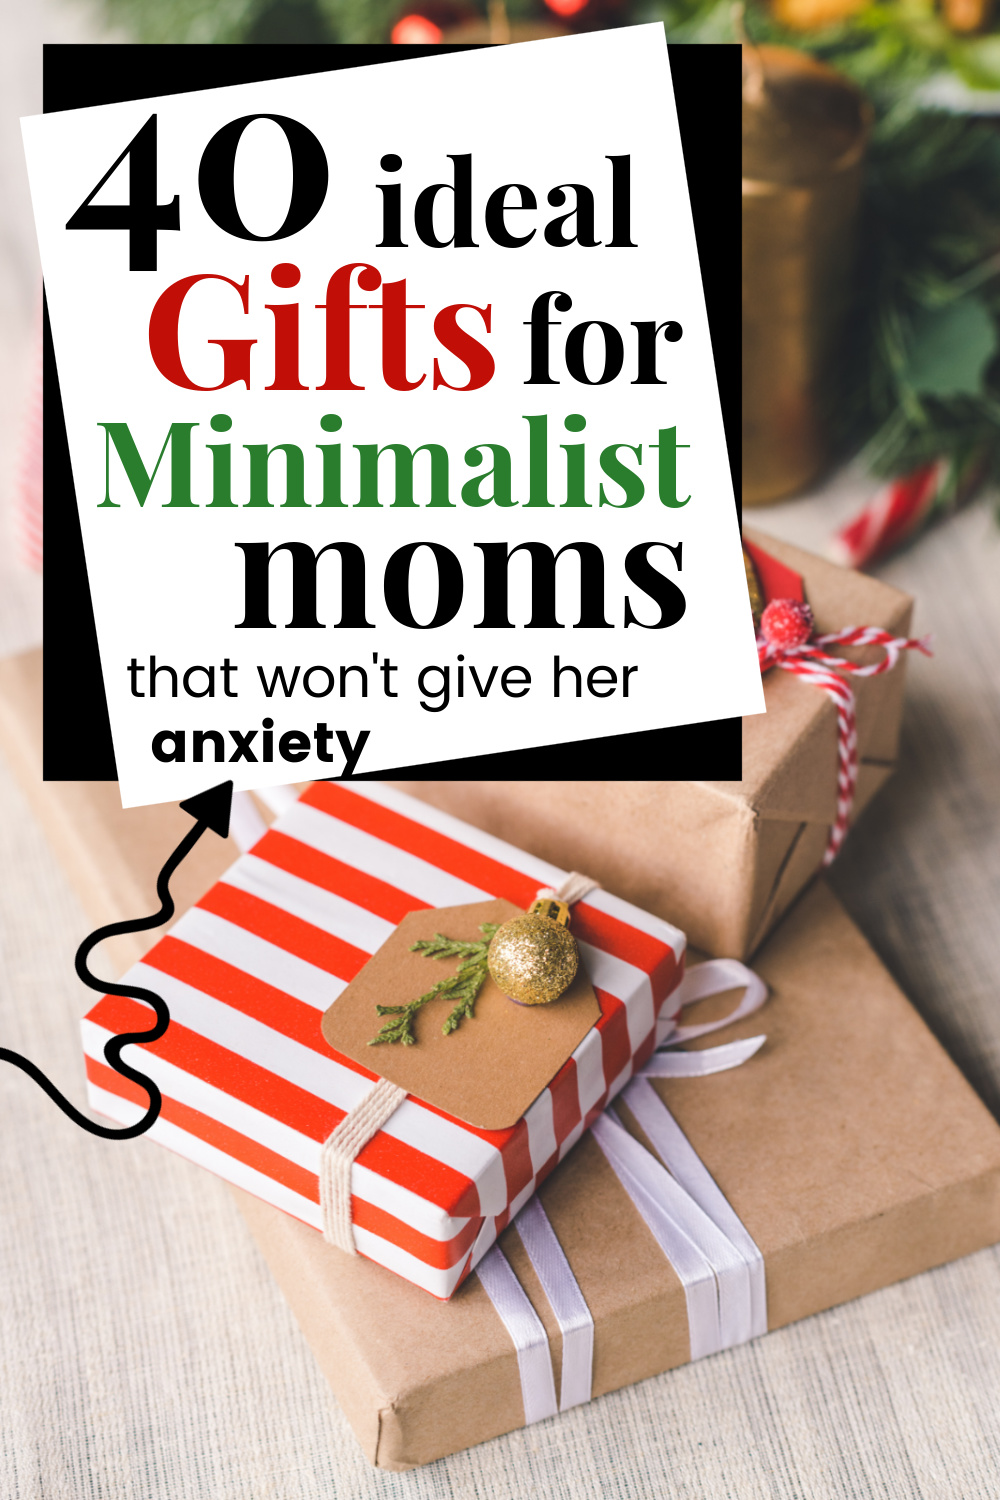 presents wrapped in brown paper and red and white striped paper, with text overlay, "40 ideal gifts for minimalist moms that won't give her anxiety"